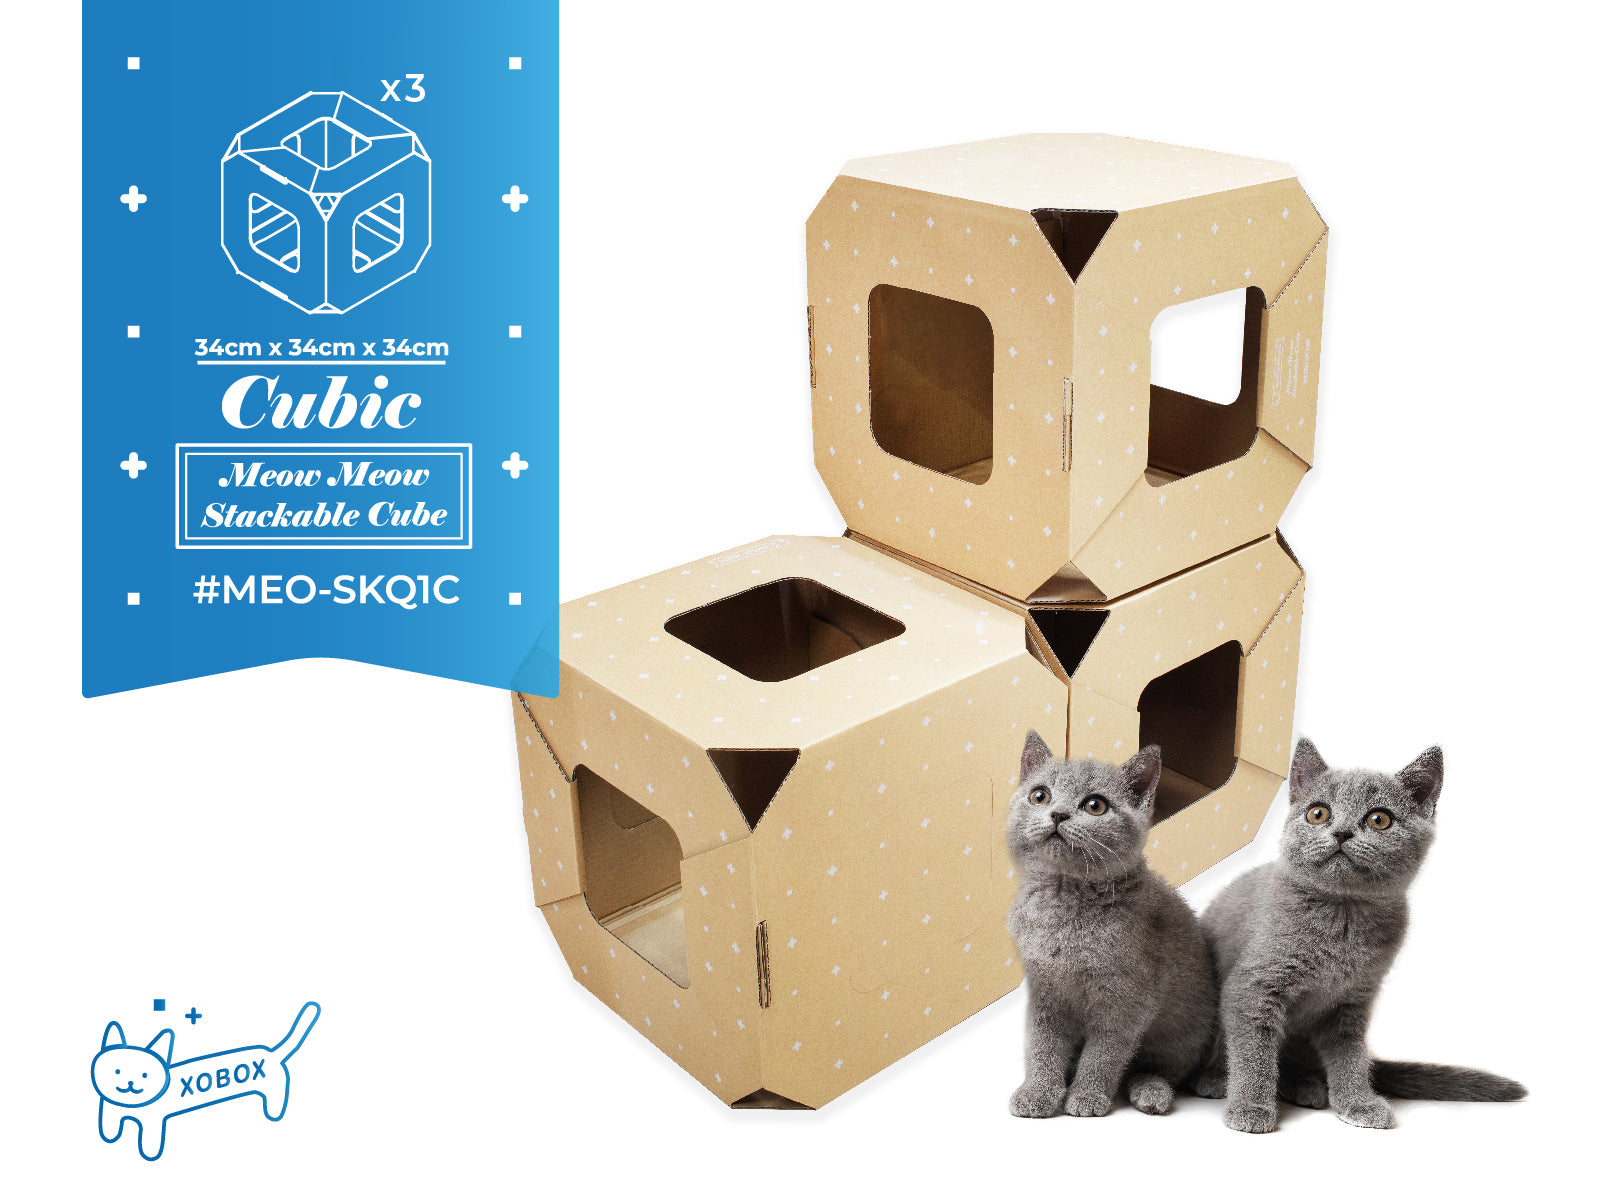 Meow Meow Stackable Cube Set 貓貓疊疊格系列